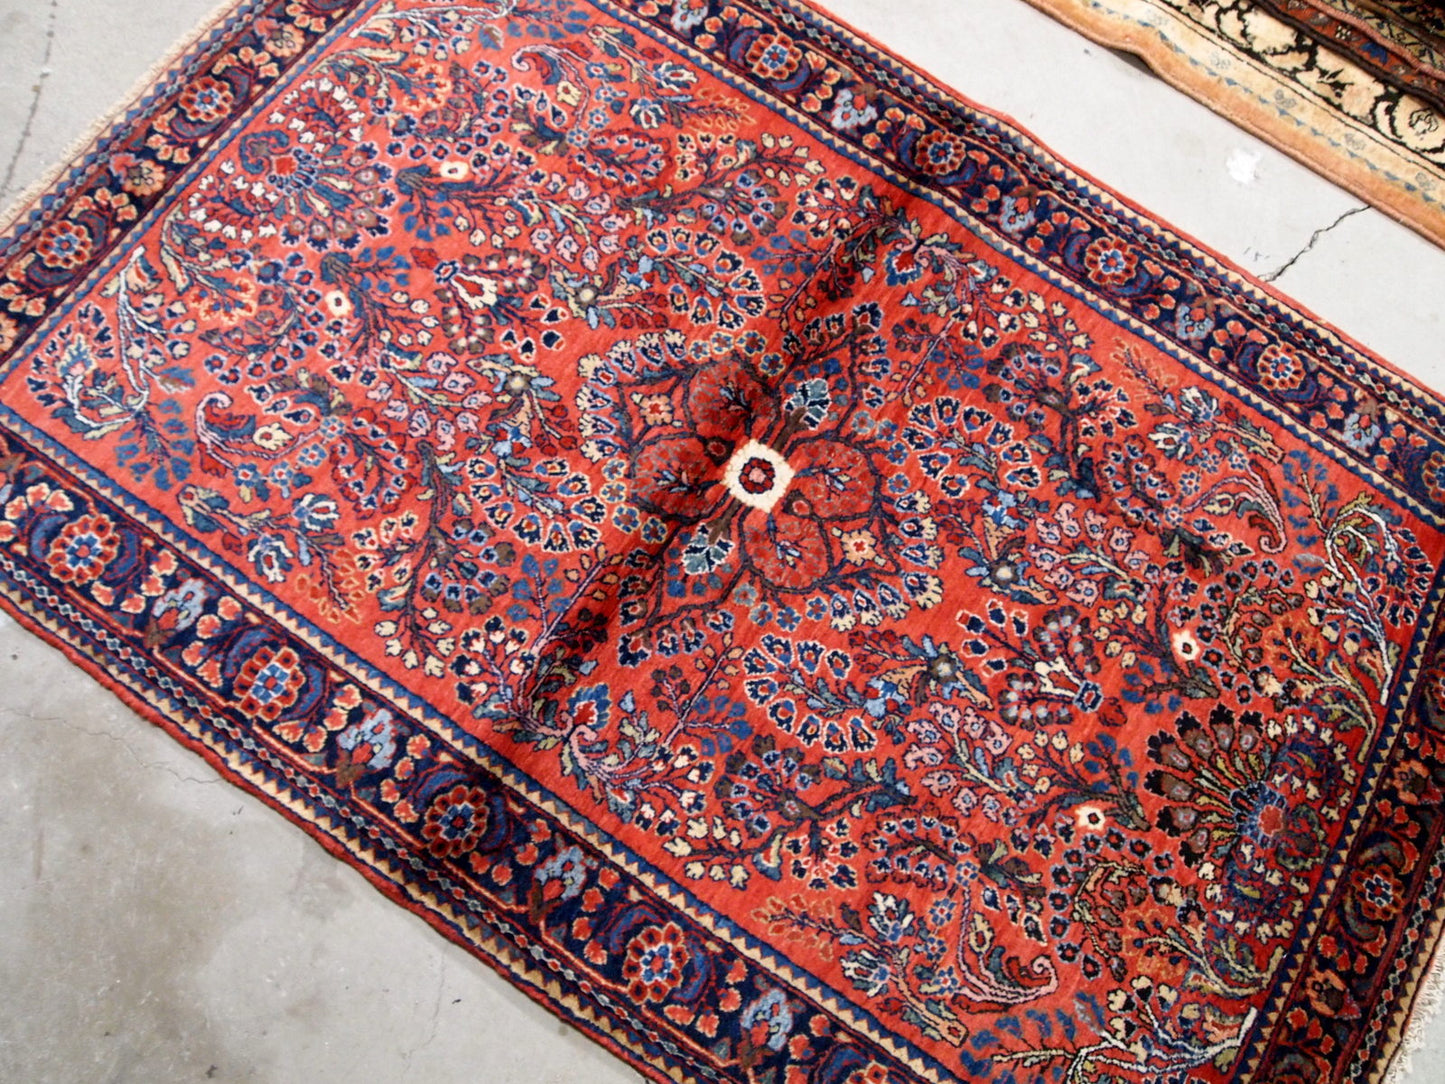 Antique handmade Persian Sarouk rug in red color. The rug is in original good condition from the beginning of 20th century.